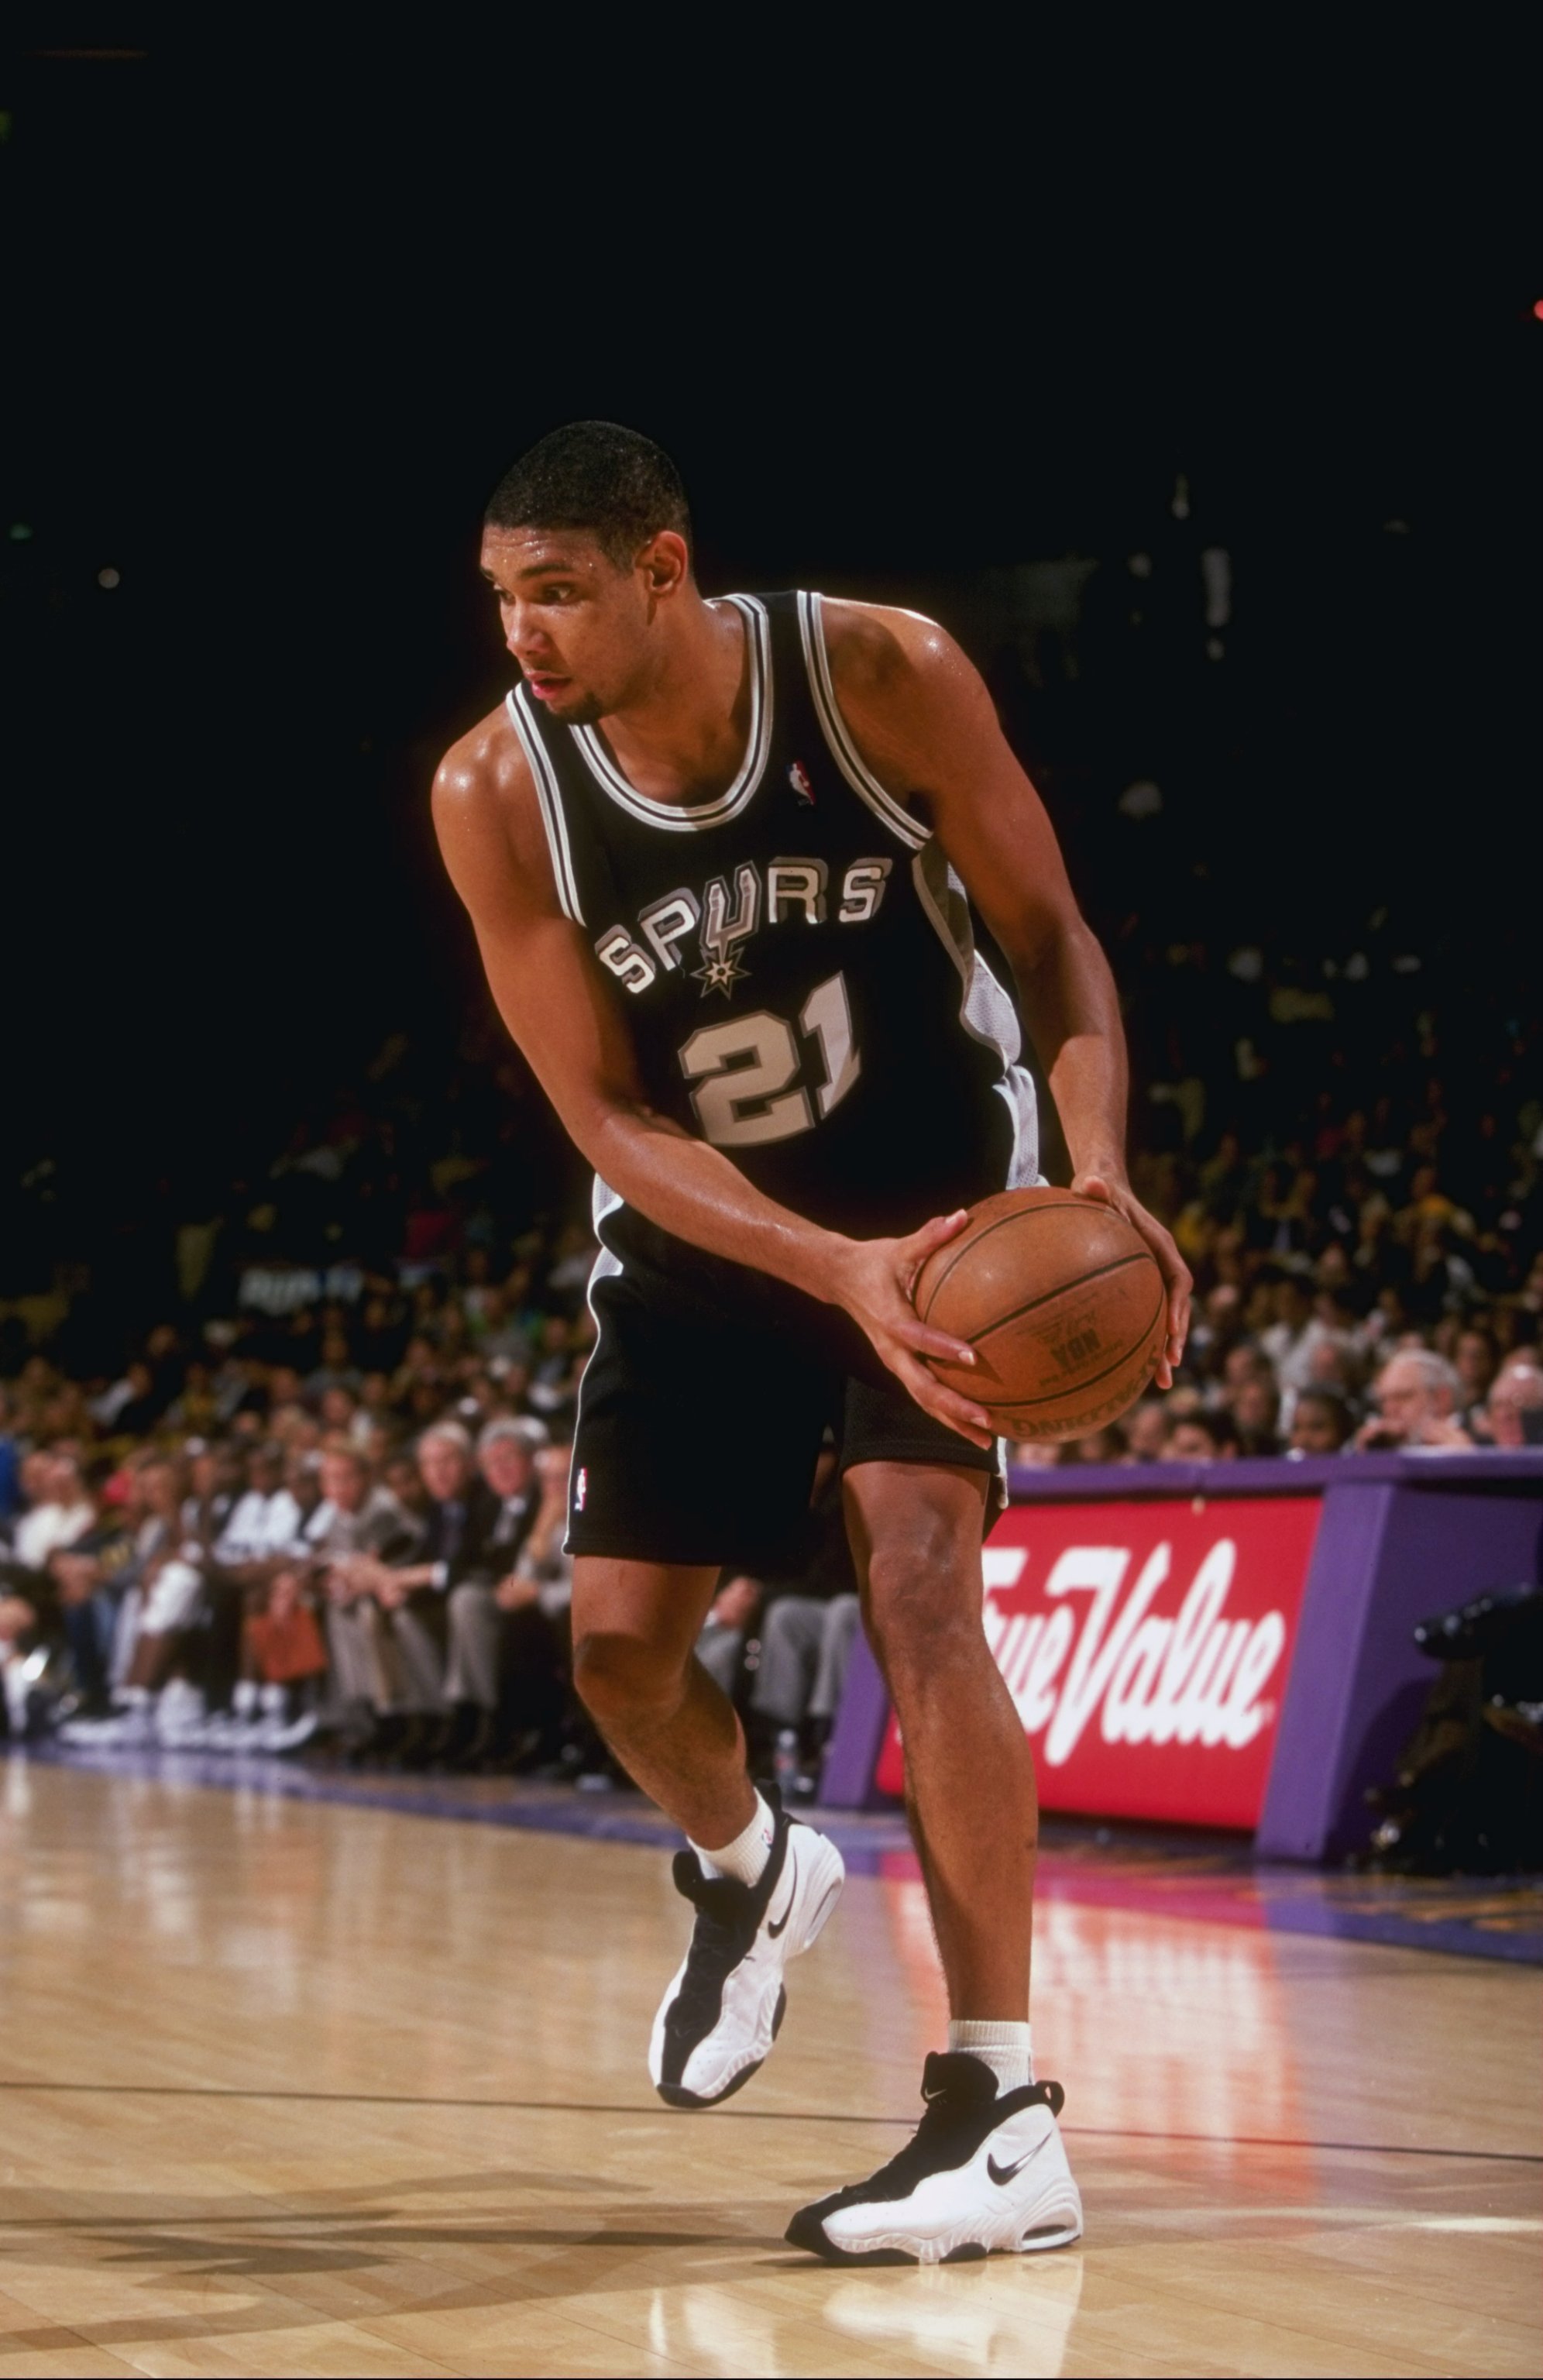 This is a photo of Tim Duncan in his 1997 season with the Spurs.